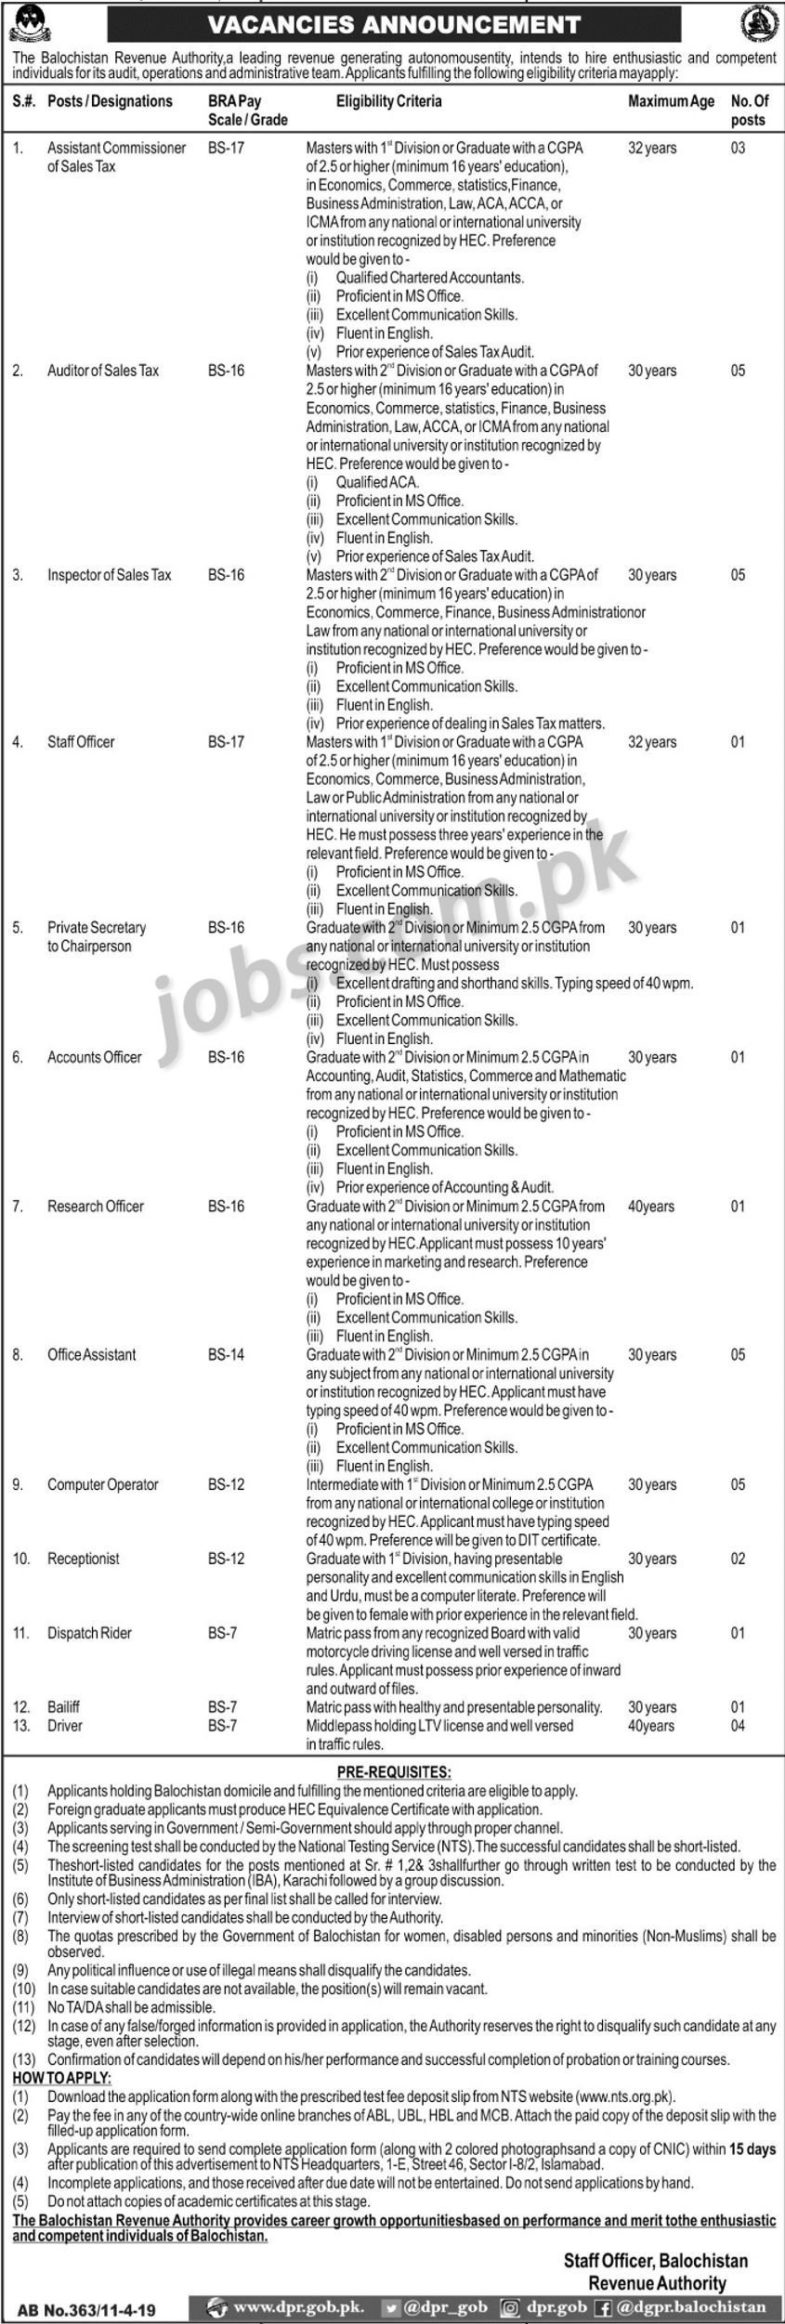 Balochistan Revenue Authority Jobs 2019 for 35+ Assistant Commissioners, Auditors, Inspectors, Accounts, Admin, IT & Other Staff (Download NTS Form)